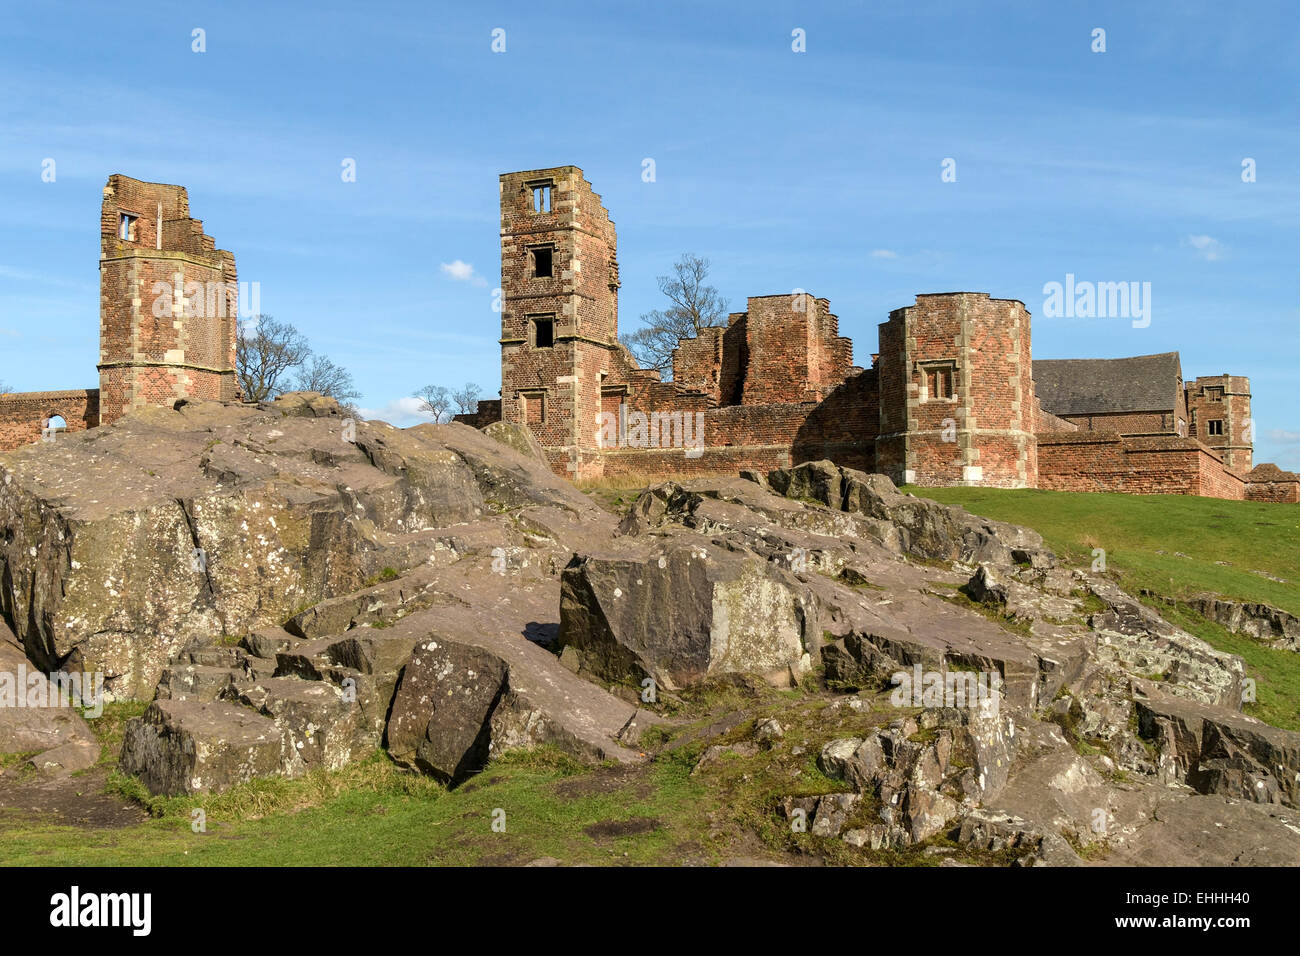 Rovine di Lady Jane Grey's House, Glenfield Lodge Park, Charnwood, Leicestershire, Inghilterra, Regno Unito. Foto Stock